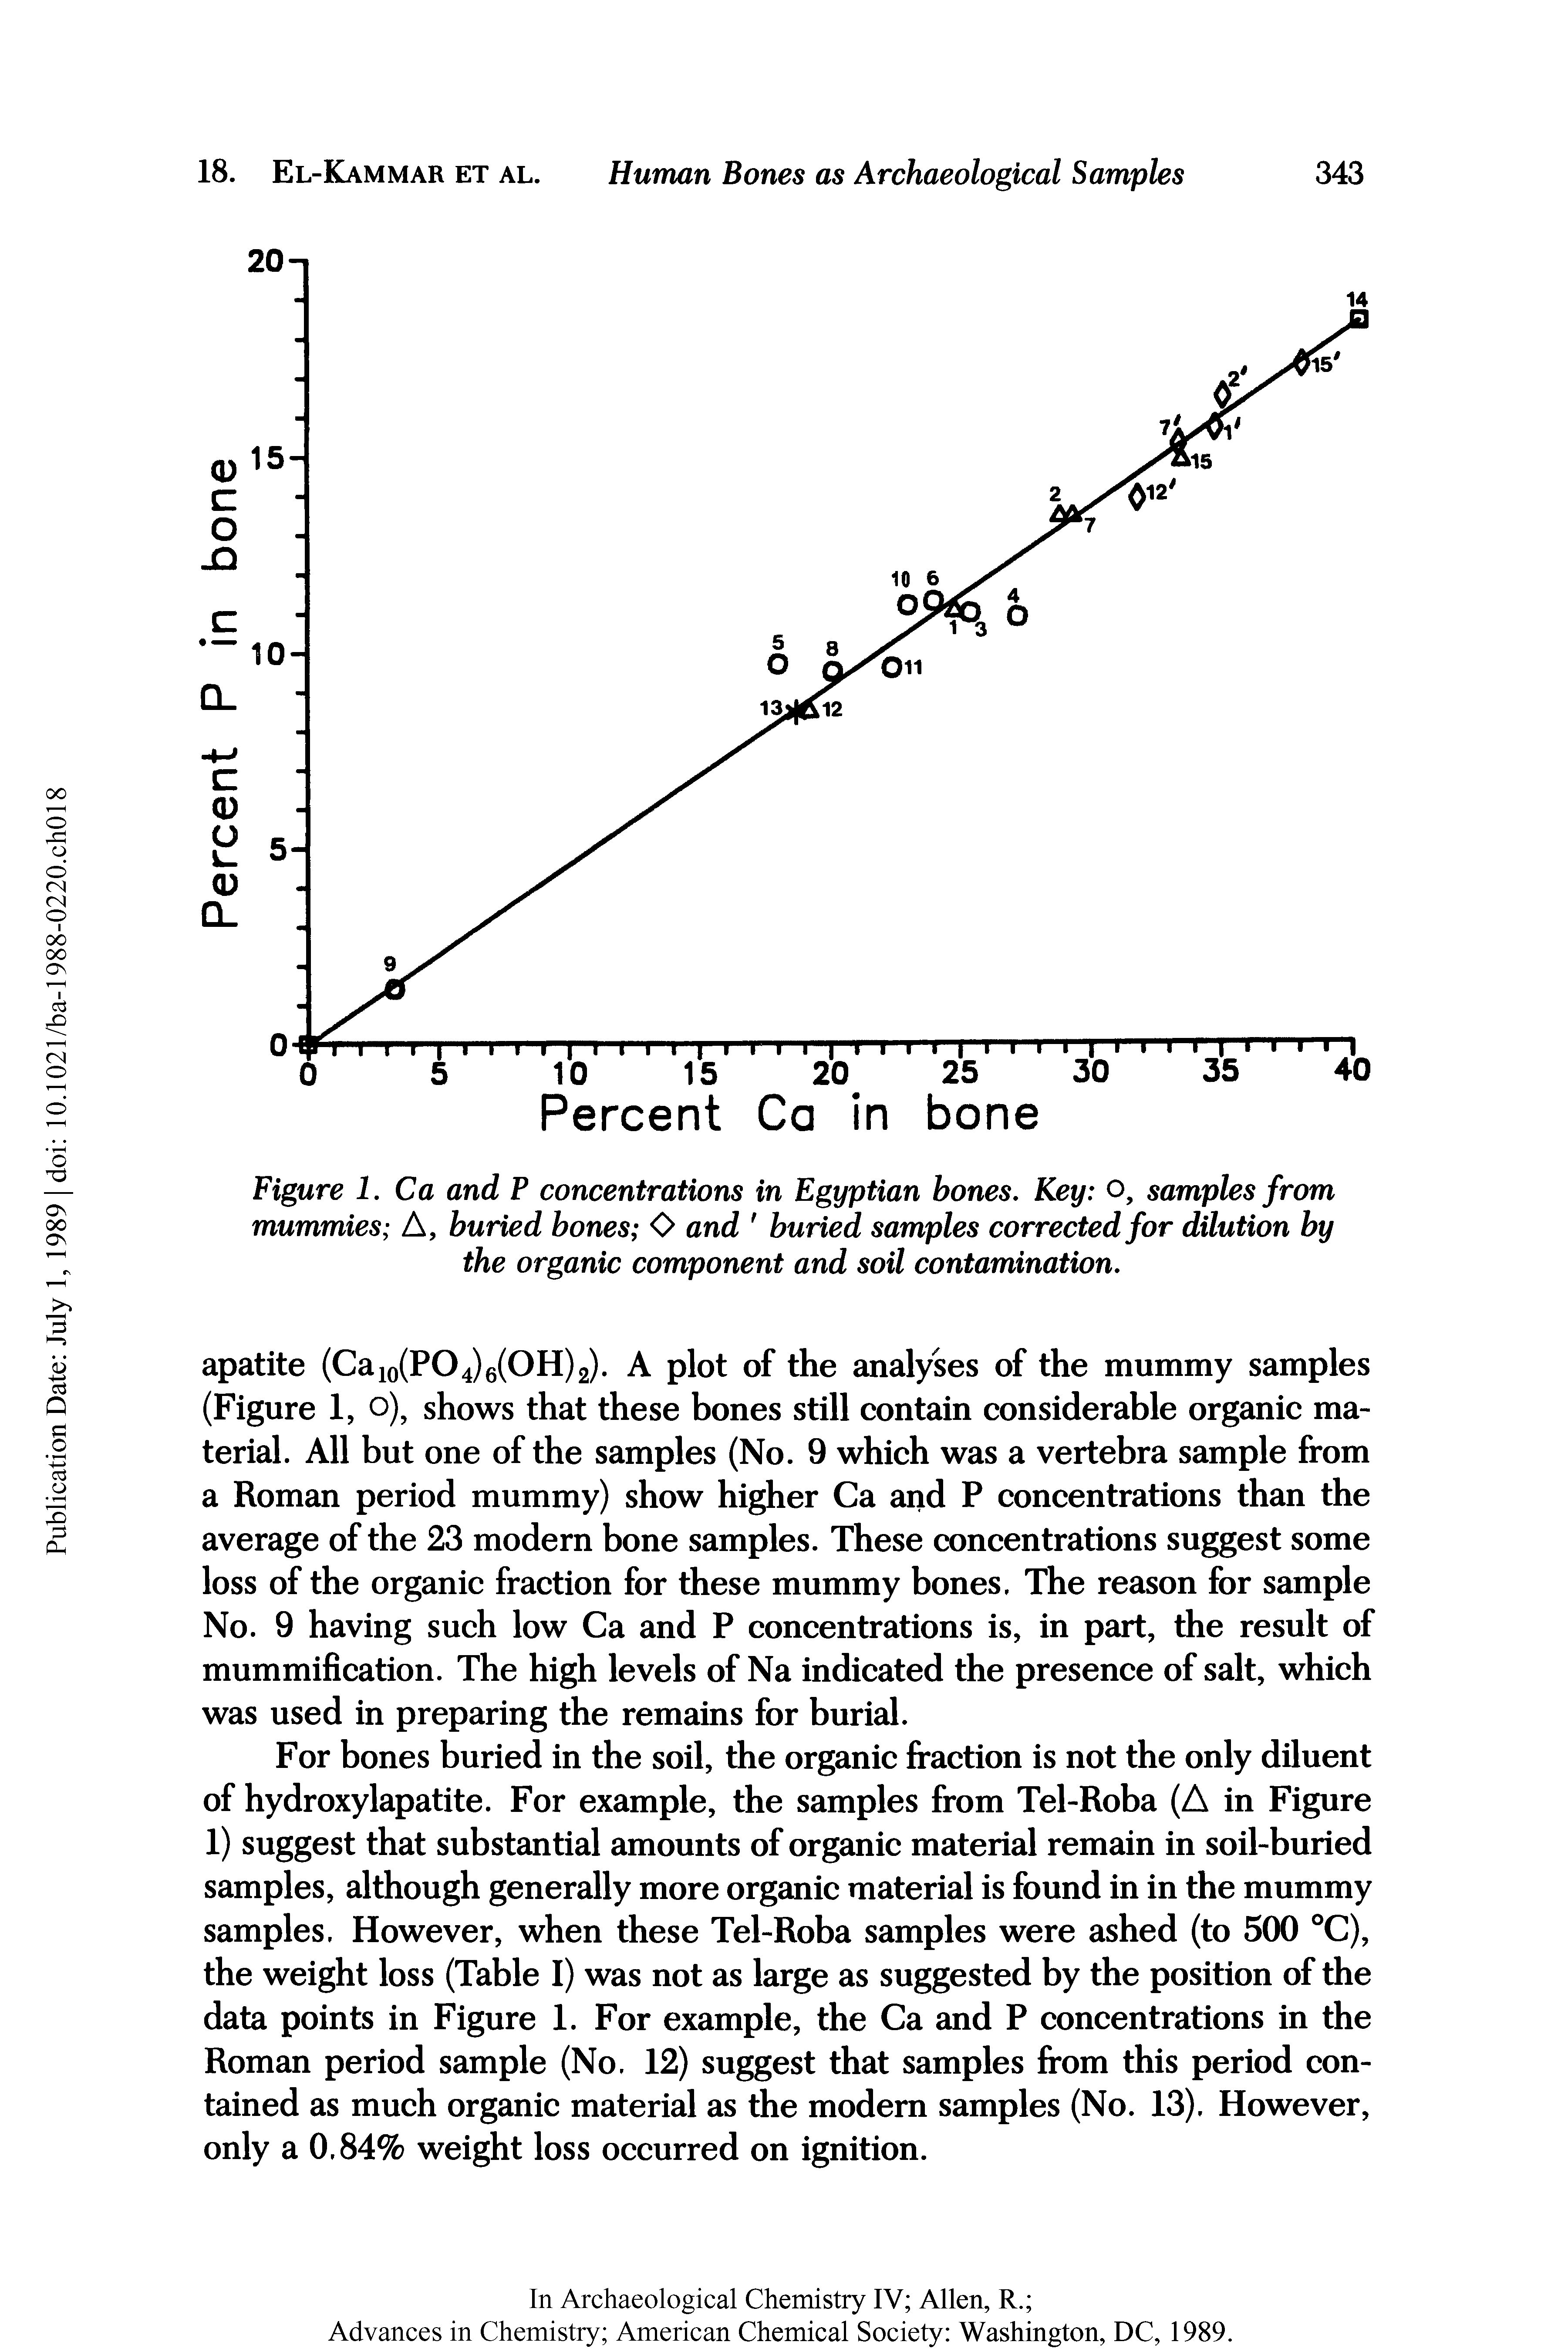 Figure 1. Ca and P concentrations in Egyptian bones. Key o, samples from mummies A, buried bones O and buried samples corrected for dilution by the organic component and soil contamination.